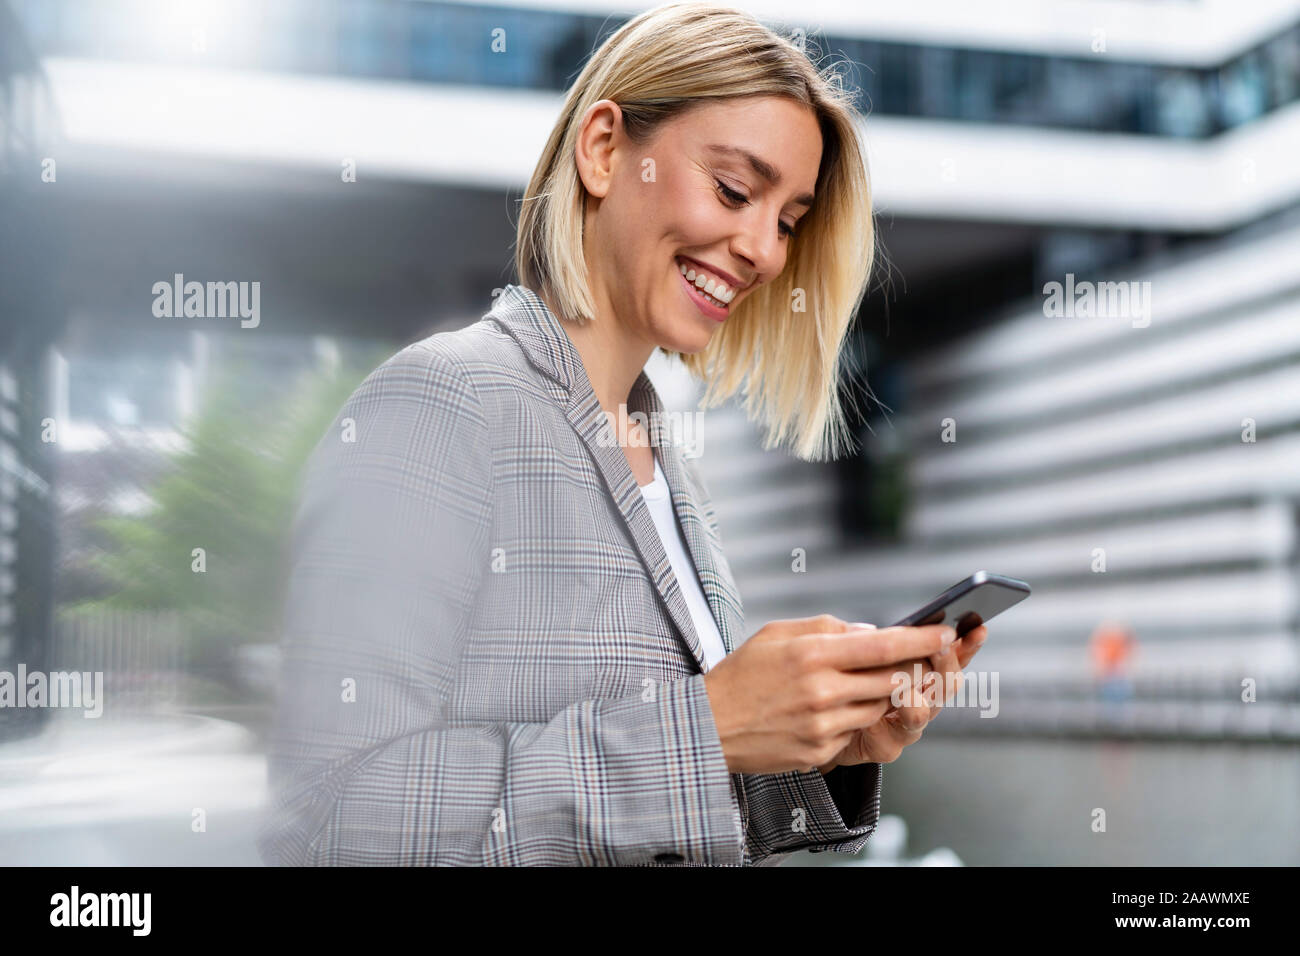 Happy young businesswoman using mobile phone in the city Stock Photo